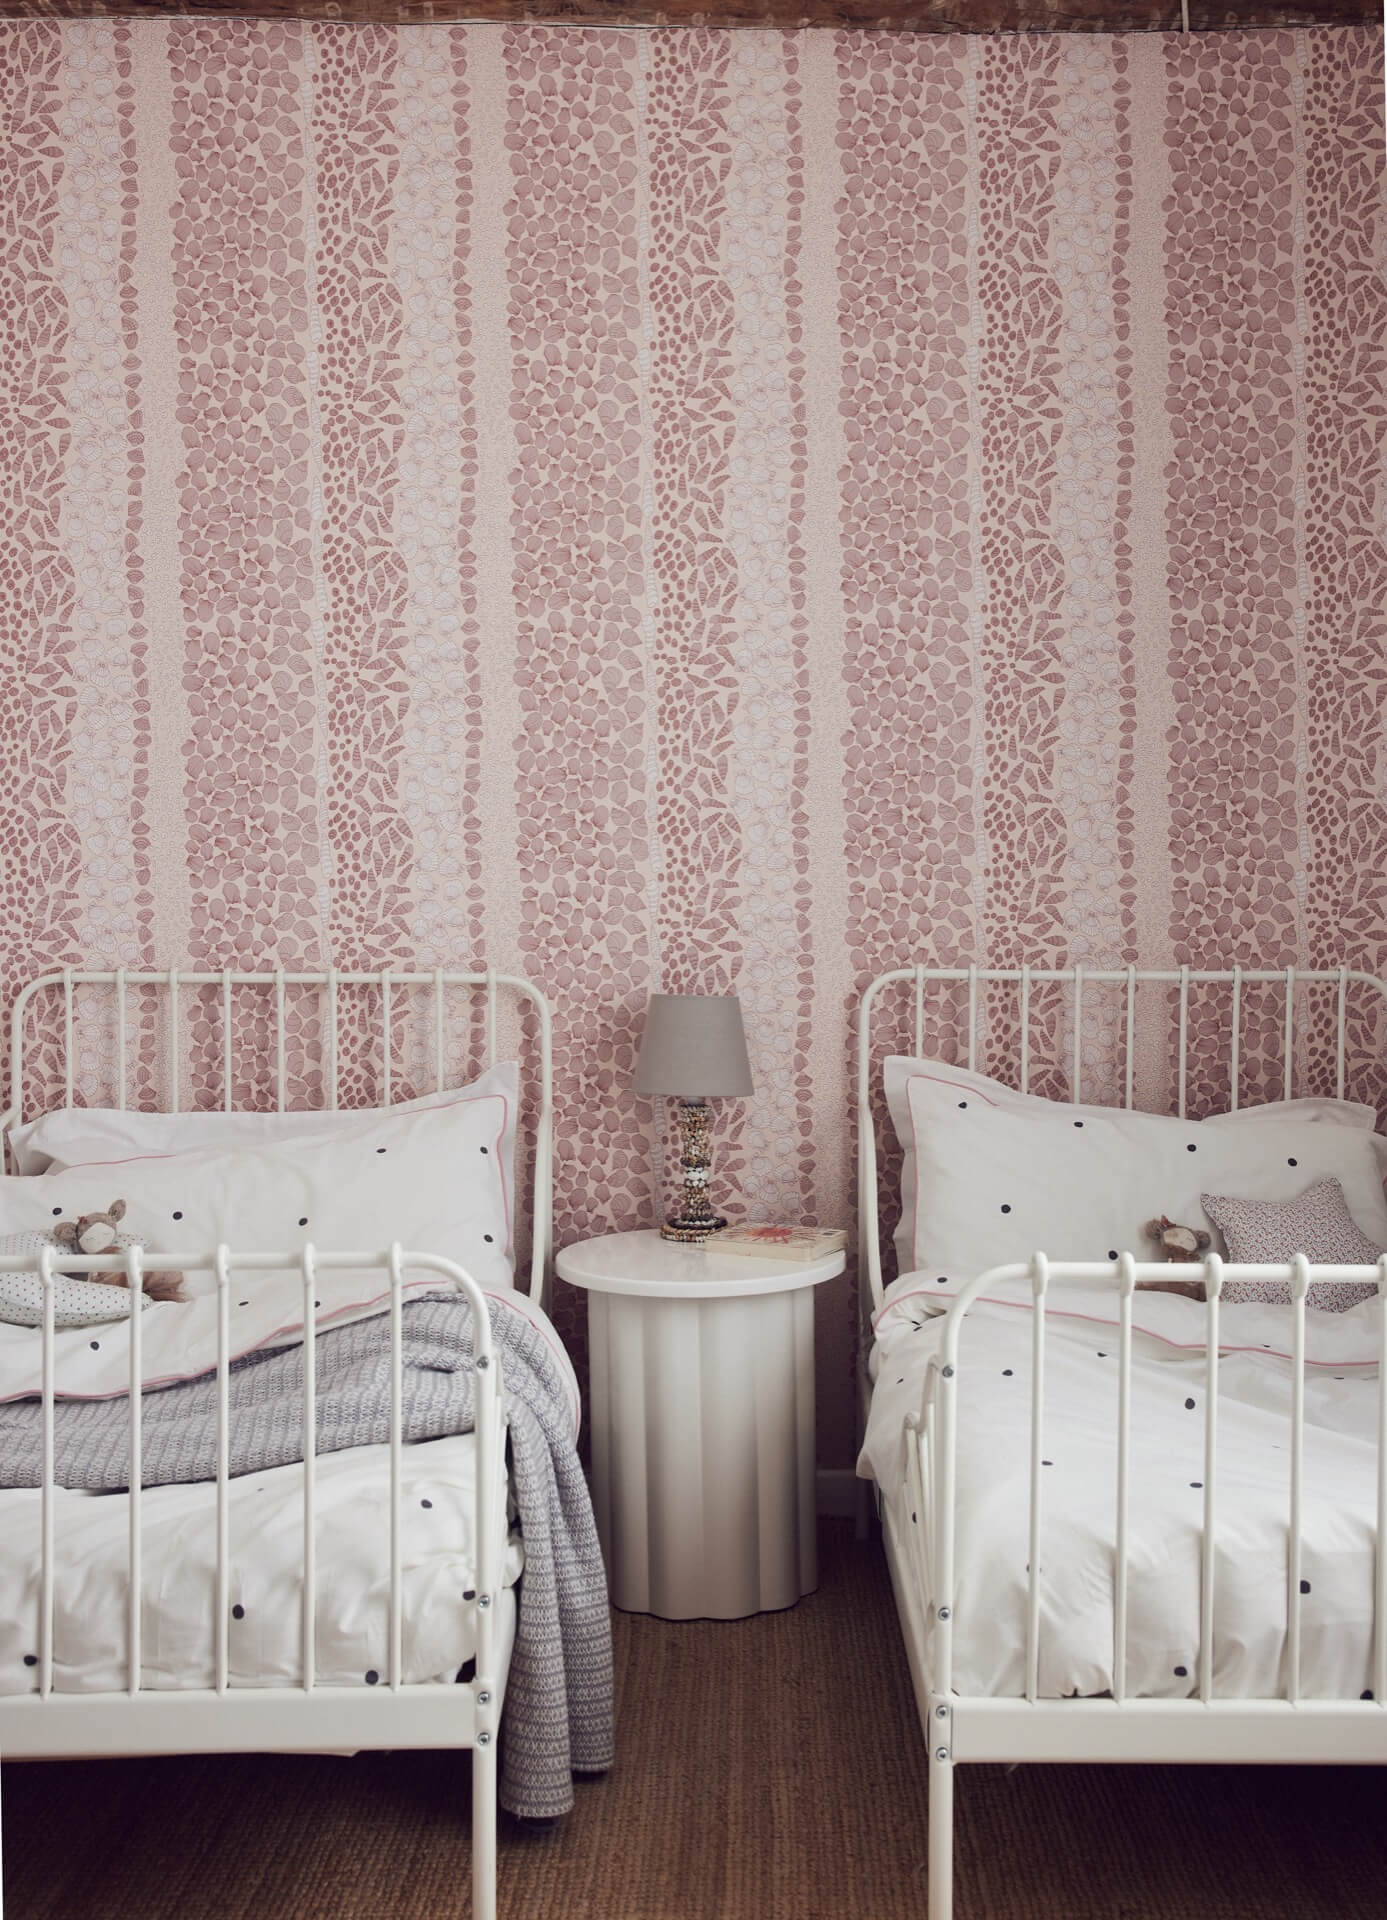 15 of the best independent wallpaper brands 